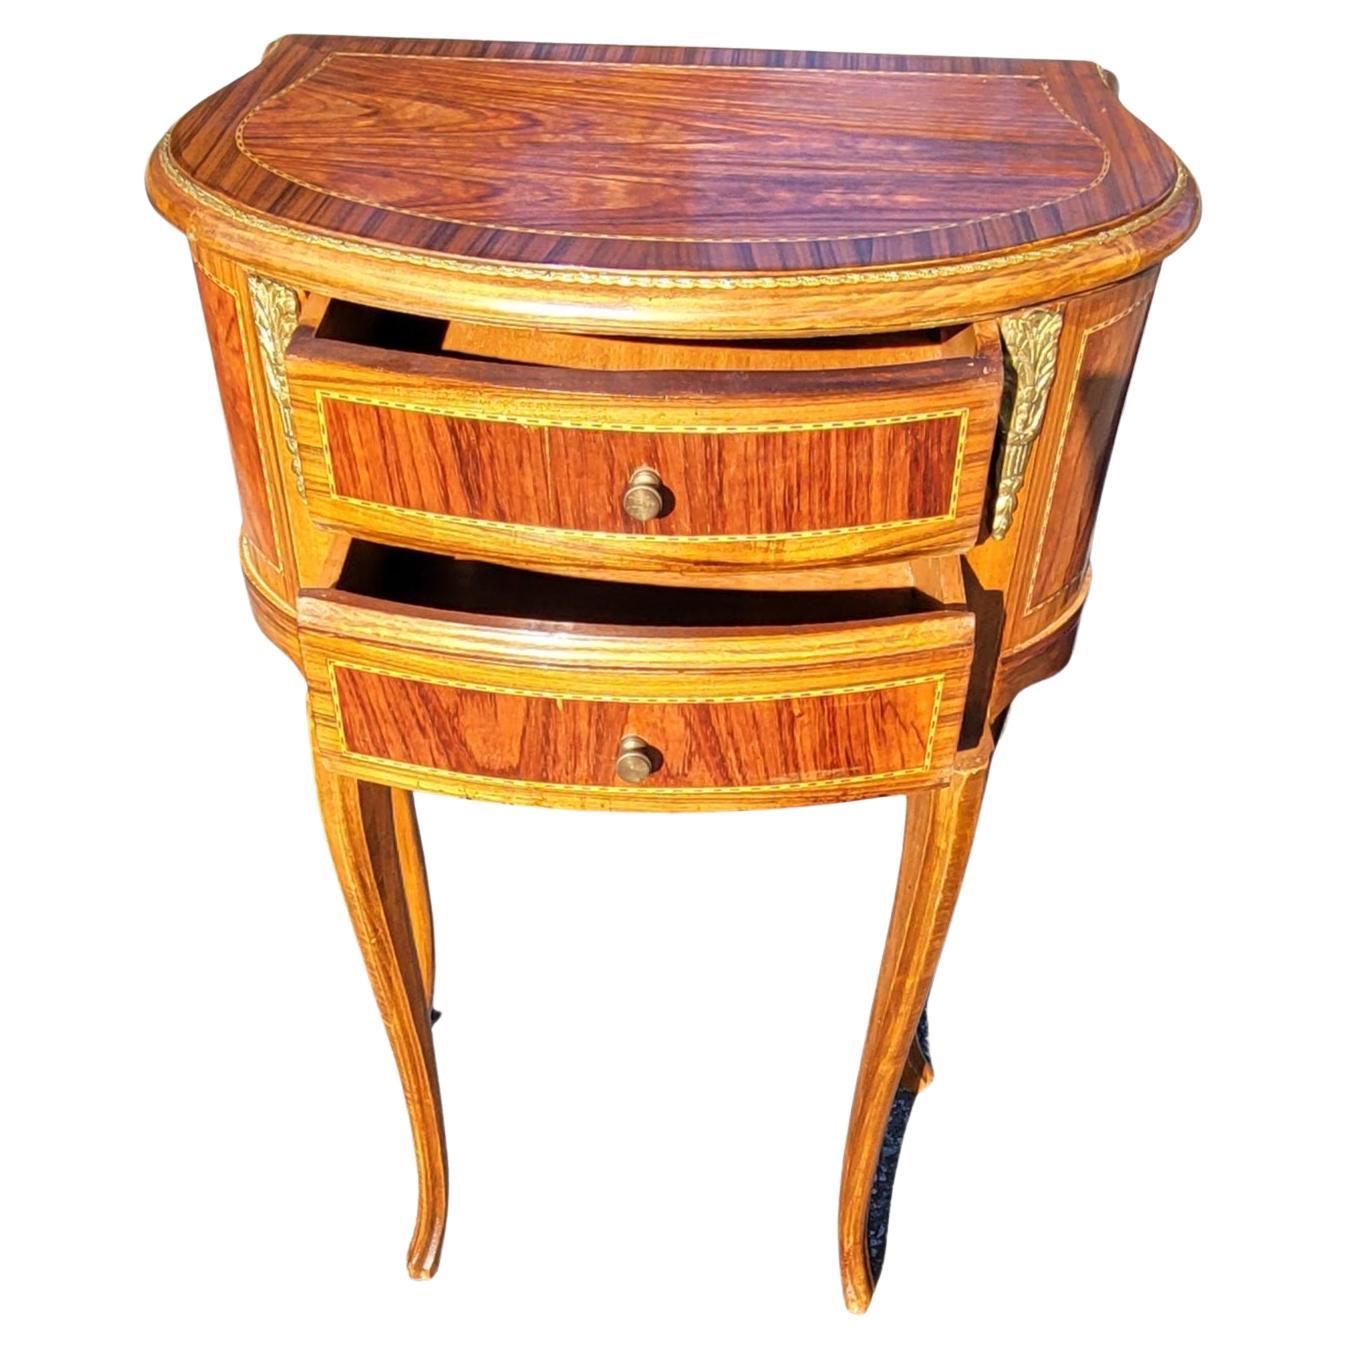 Hand-Crafted 20th Century French Louis XV Walnut Kingwood Satinwood Inlaid Ormolu Side Table For Sale